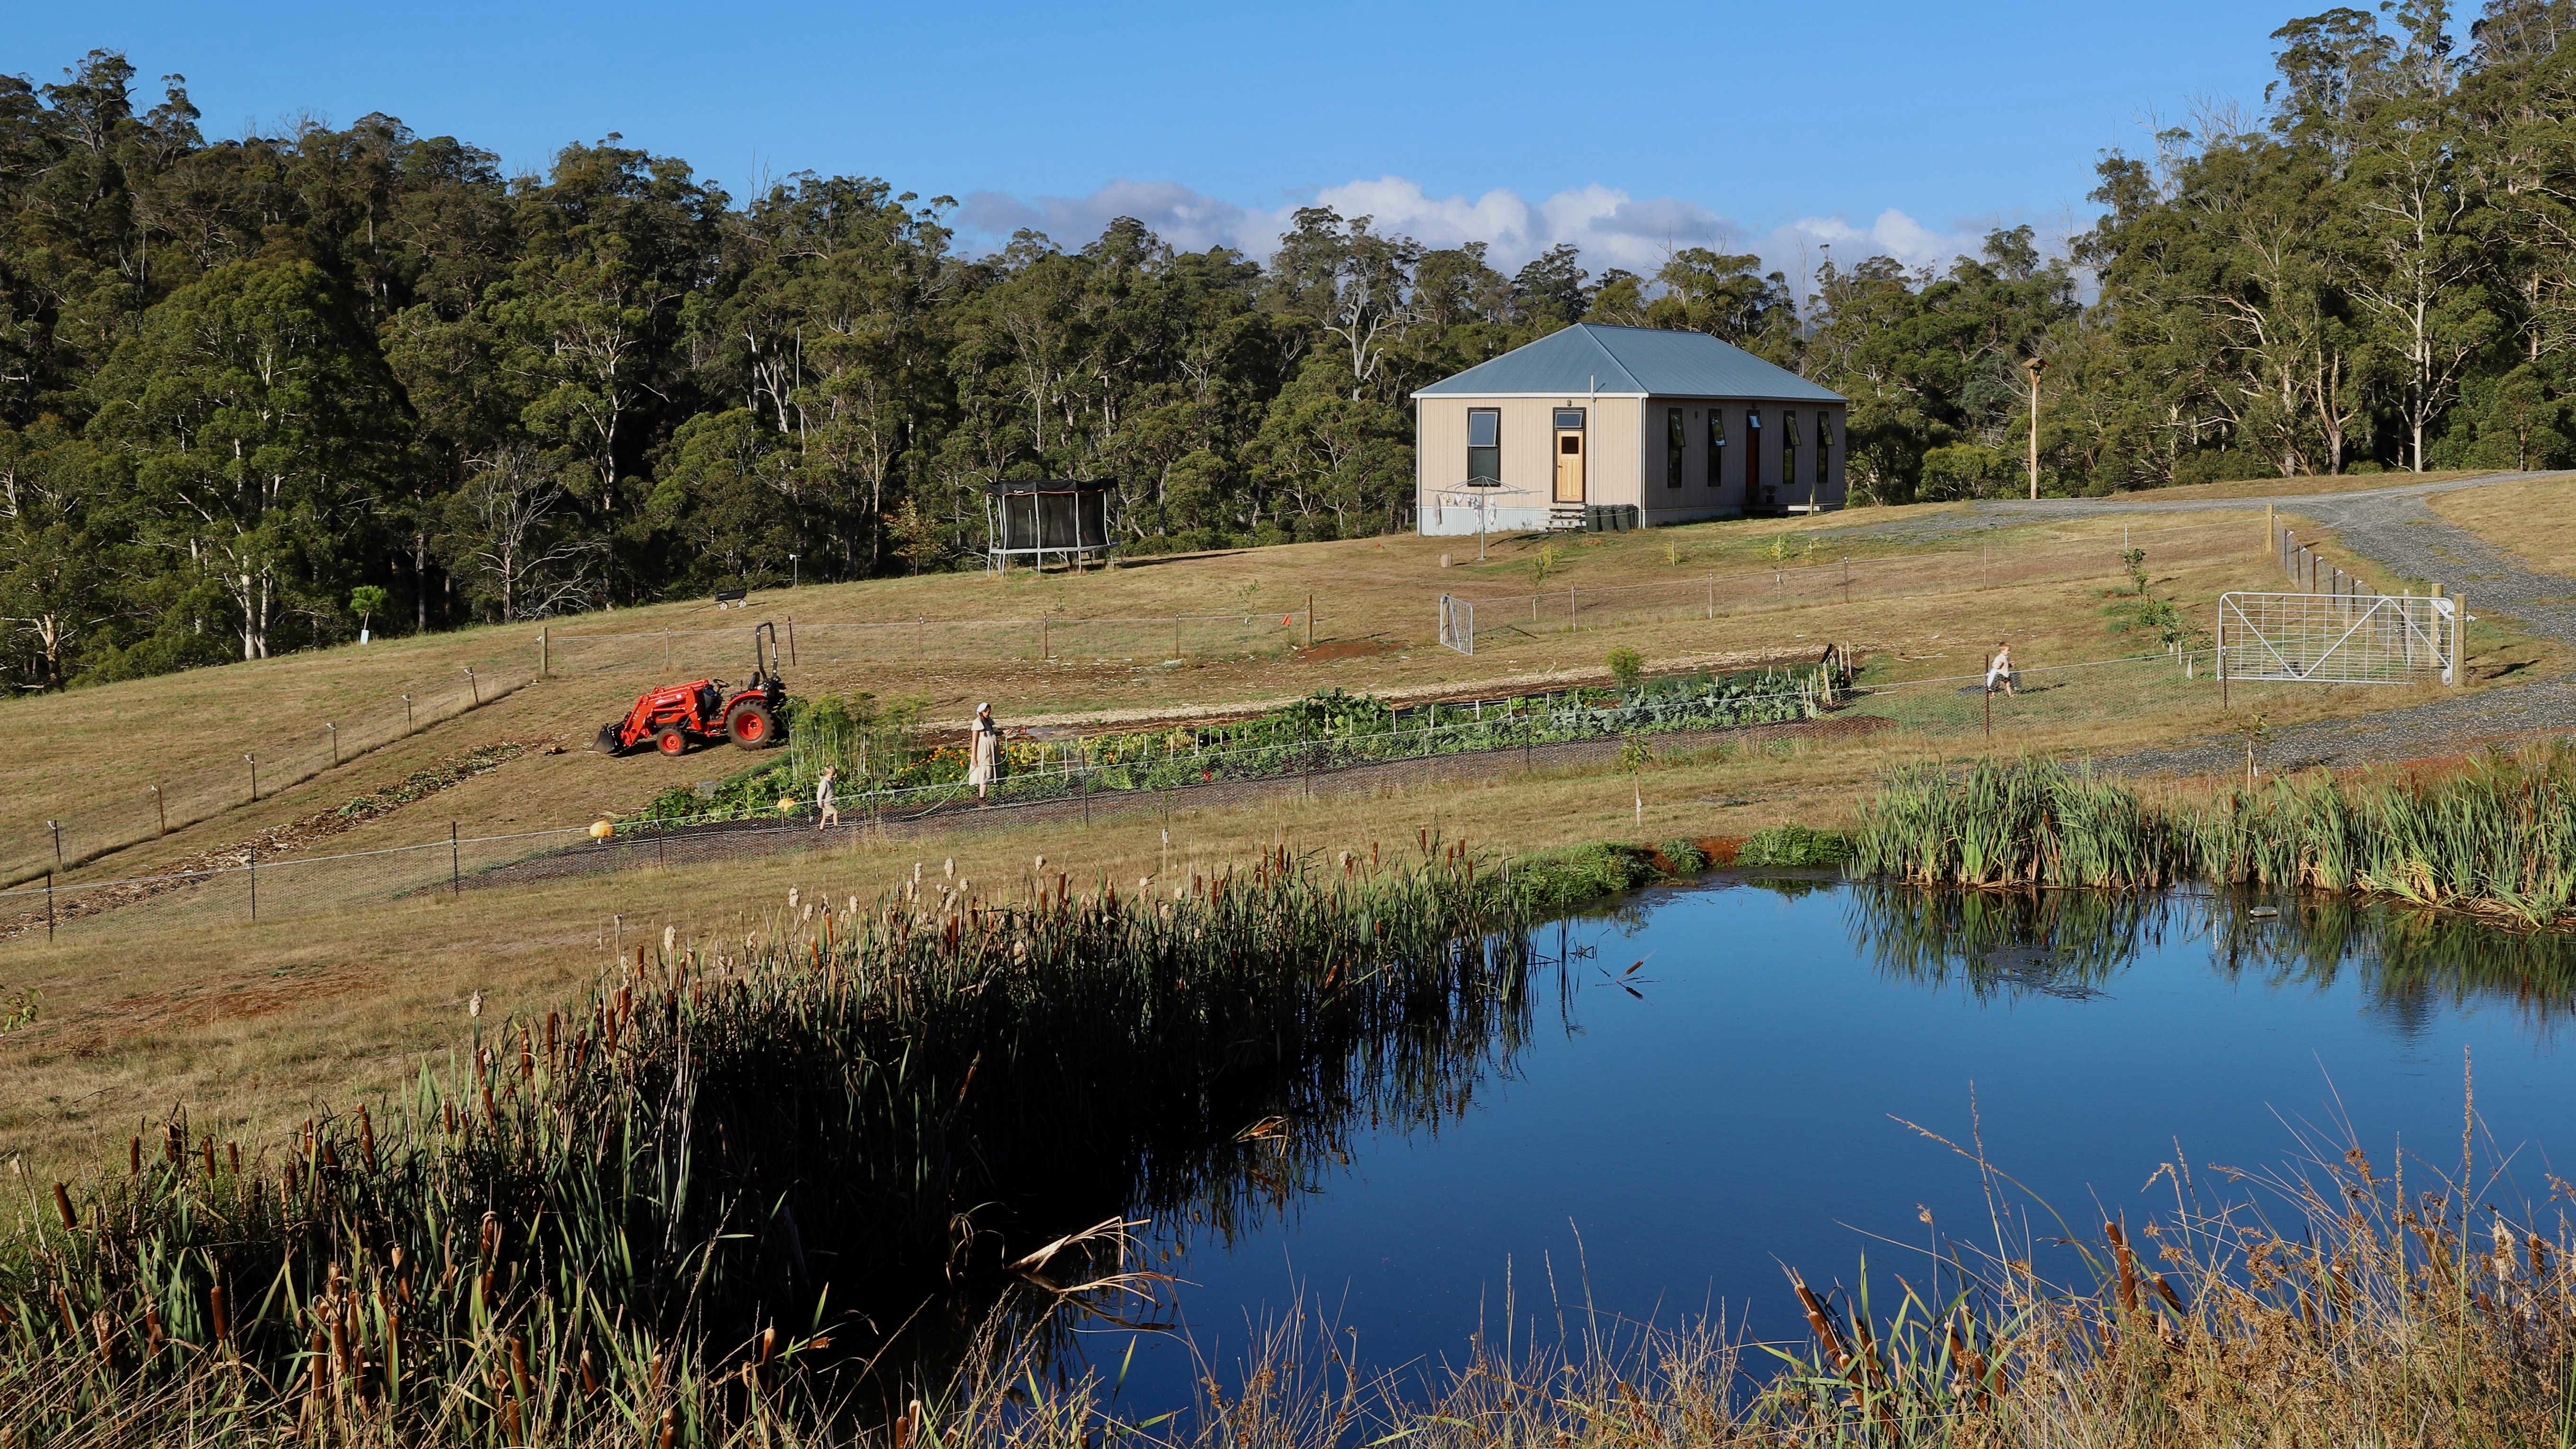 The home is open plan, with high ceilings and large windows to make the most of the rural scenery in northern Tasmania.